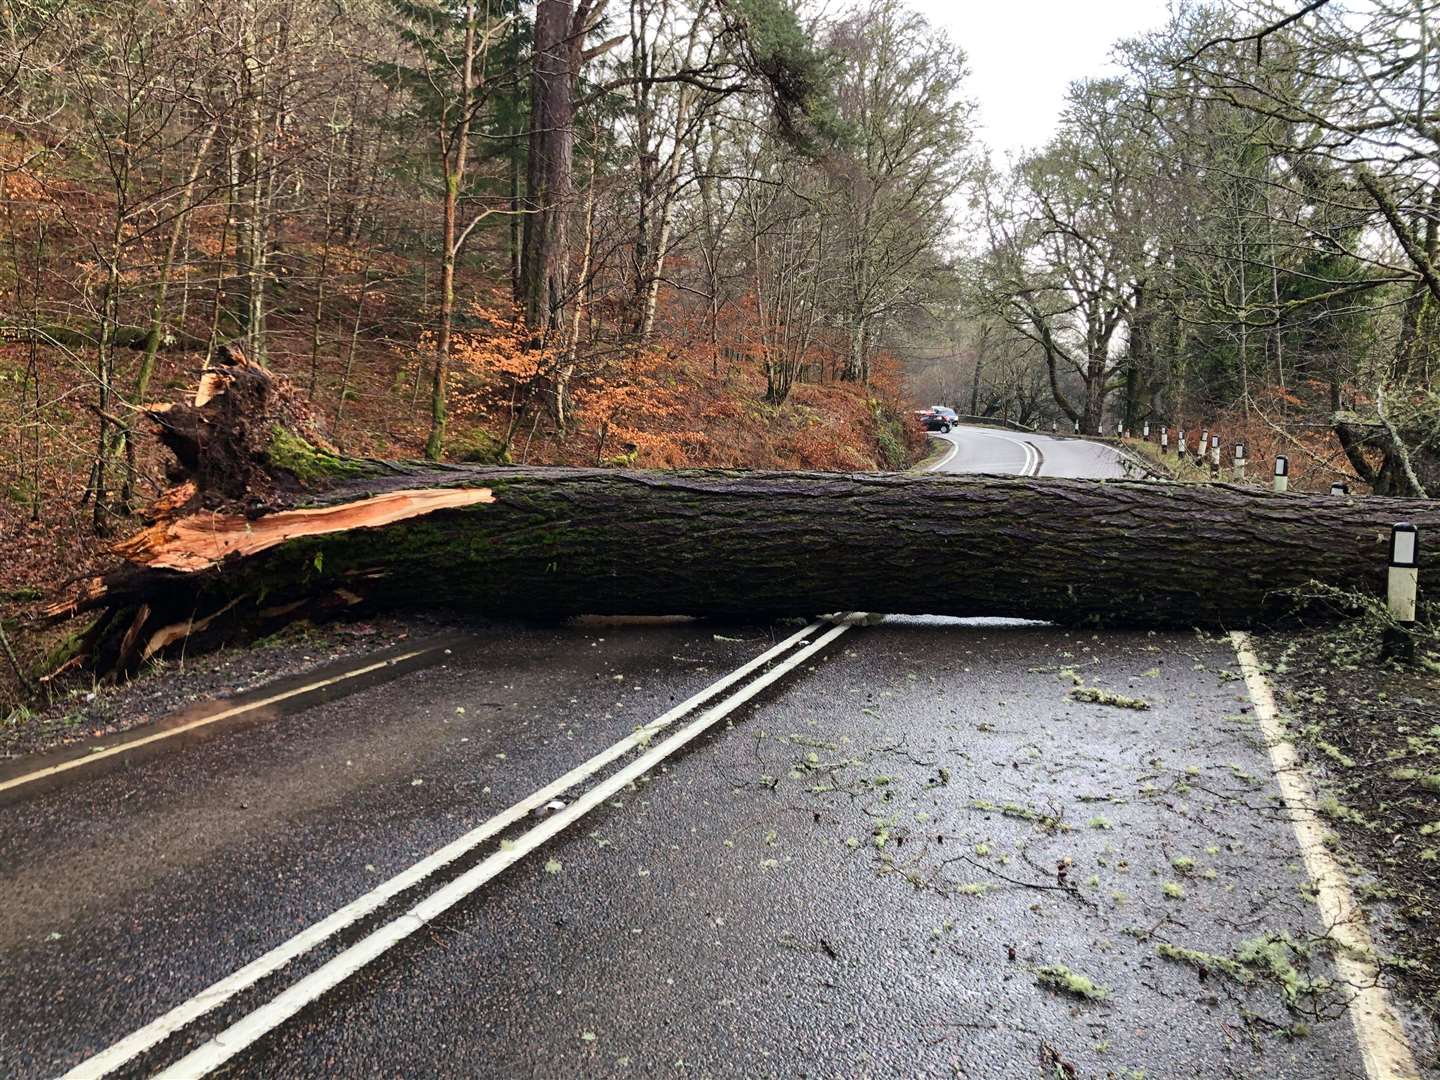 The tree landed on the A82. Picture: John Mowatt